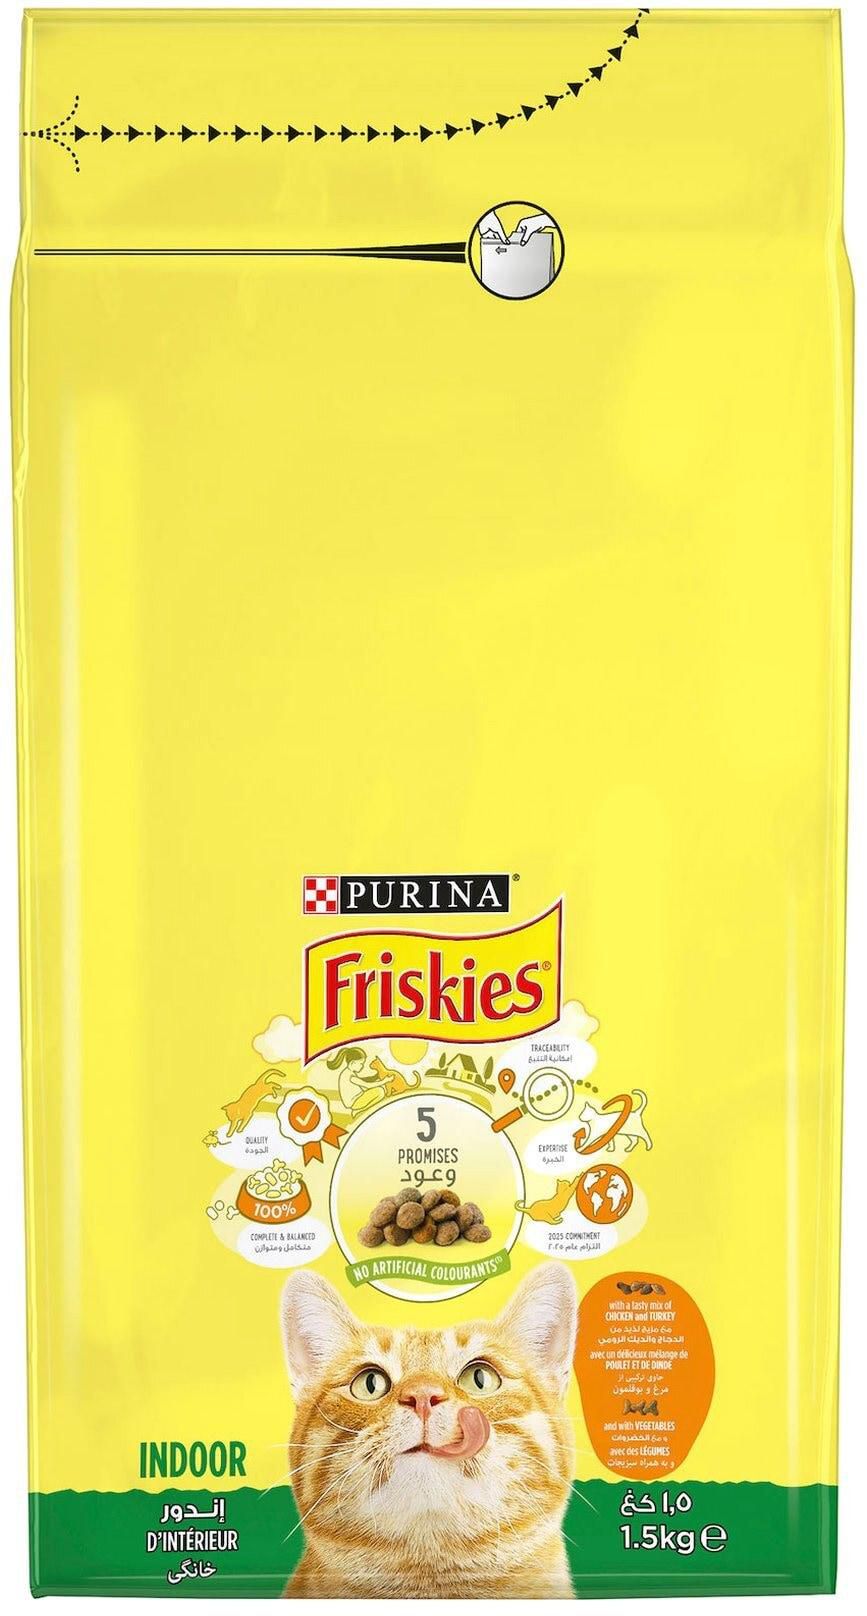 Purina Friskies Indoor Dry Cat Food With A Tasty Mix Of Chicken Turkey And Vegetables 1.5kg